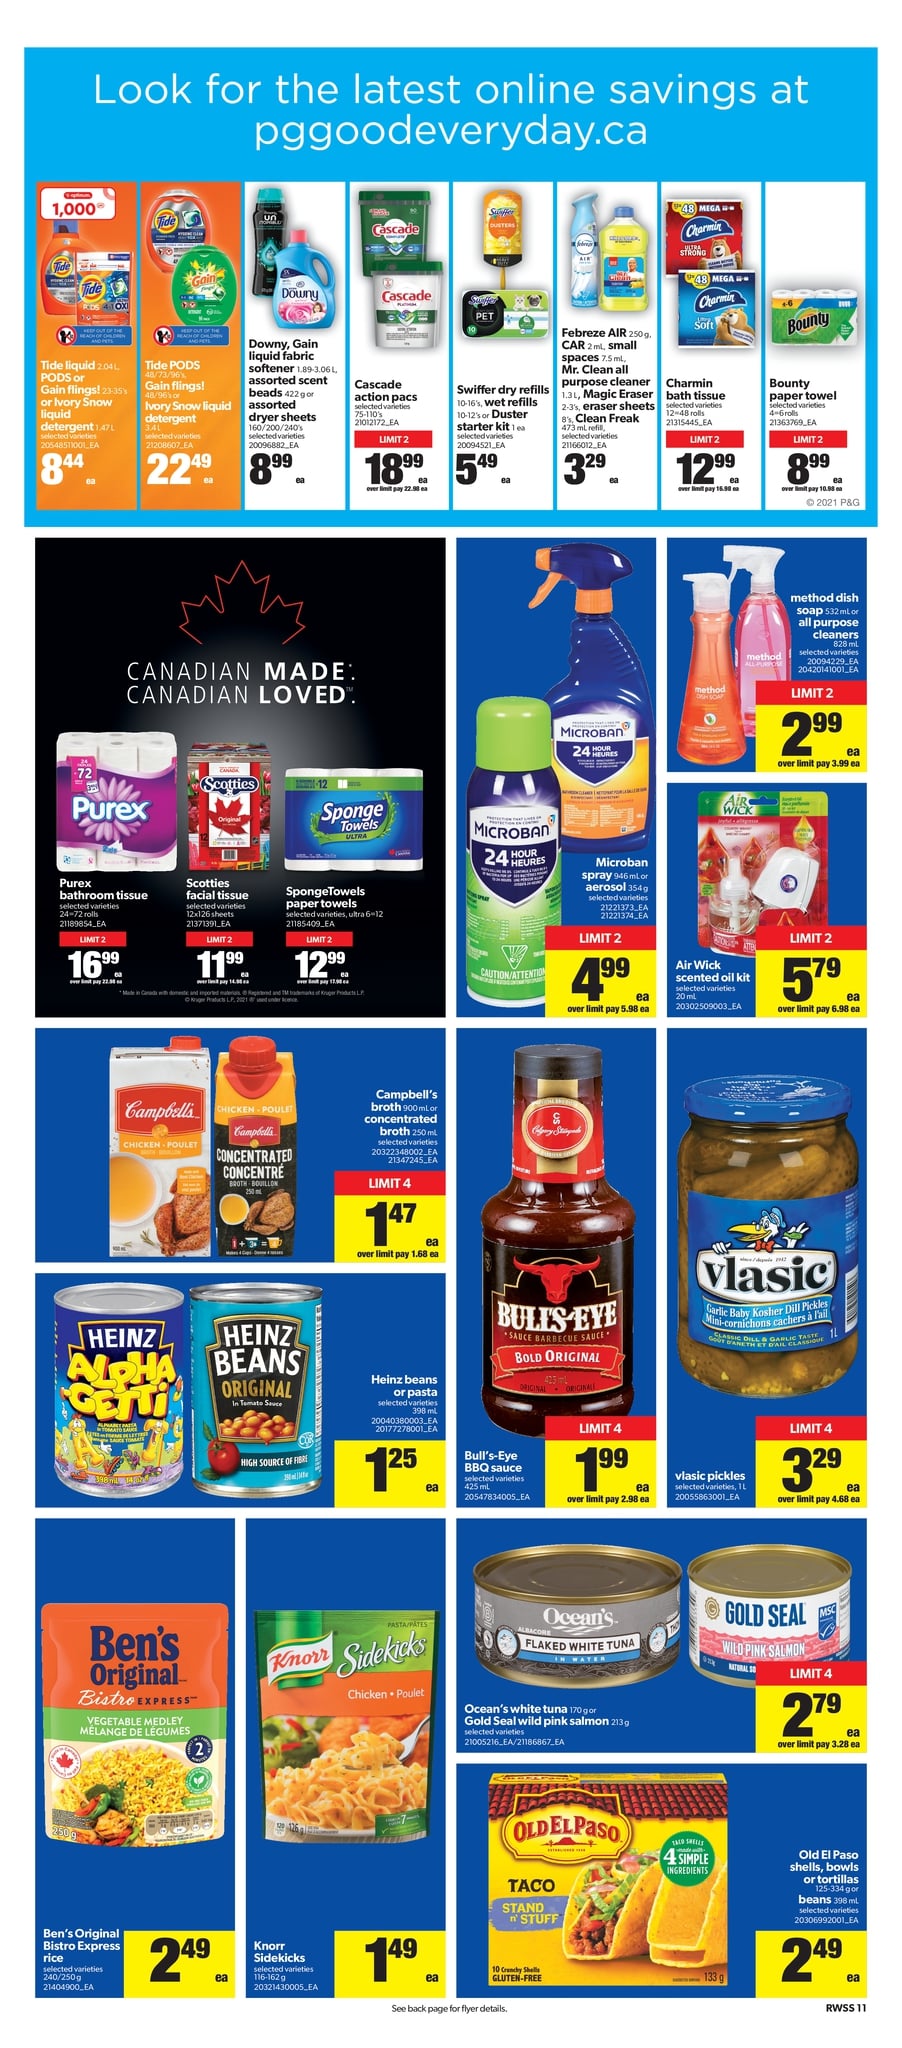 Real Canadian Superstore Western Canada - Weekly Flyer Specials - Page 12